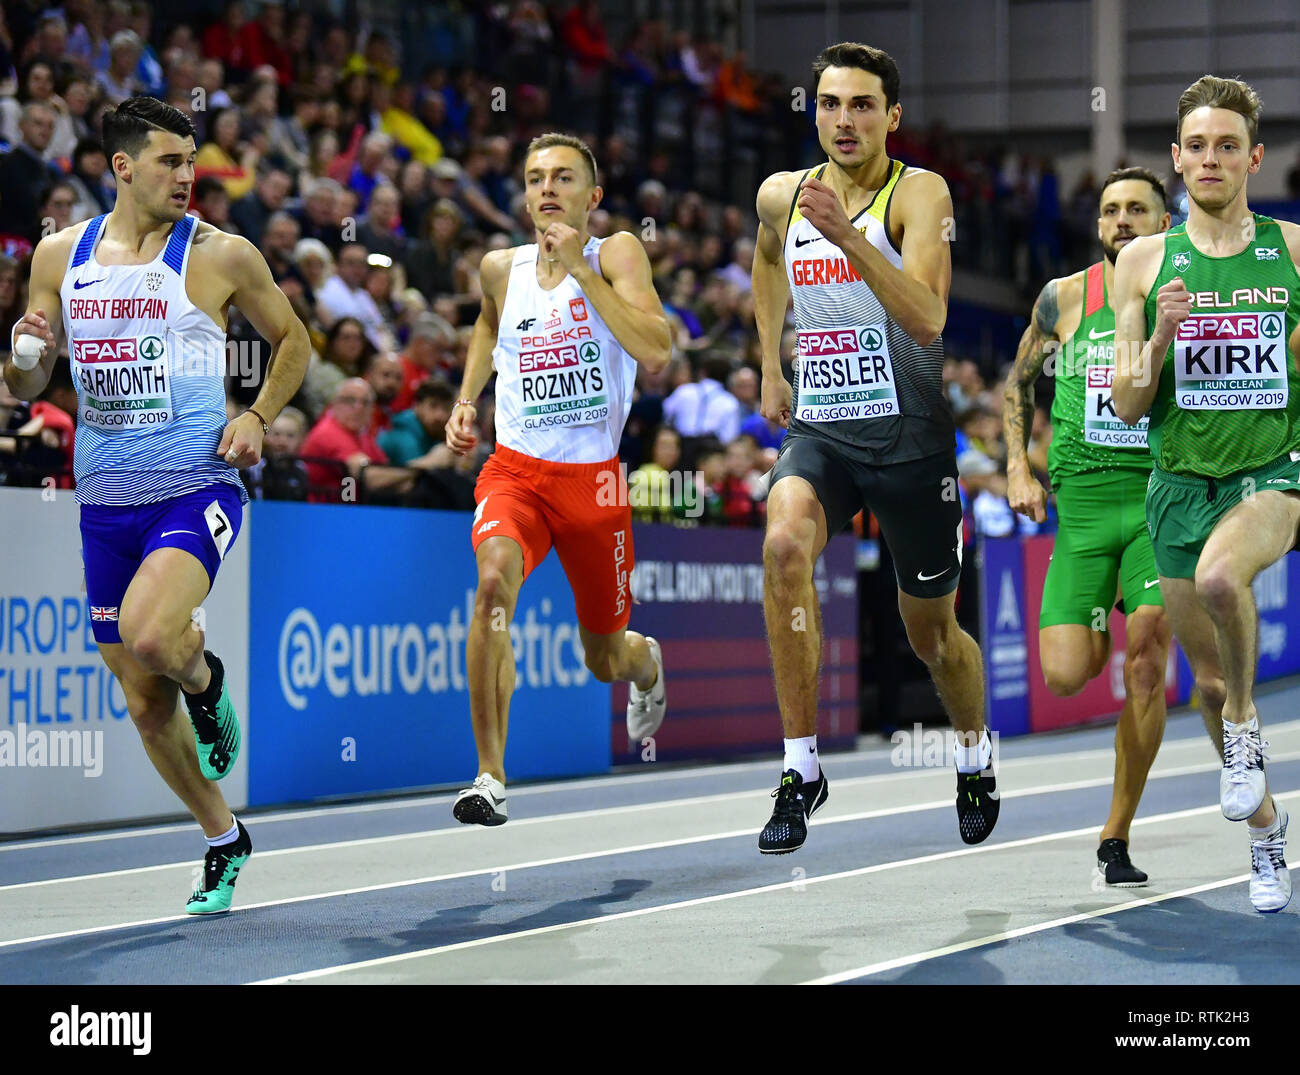 Glasgow, UK. 01st Mar, 2019. Athletics, European Indoor Championships, 800 metres, men, qualification, in the Emirates Arena: Guy Learmonth (l-r) from Great Britain, Michal Rozmys from Poland, Christoph Kessler from Germany, Tamas Kazi from Hungary and Conall Kirk from Ireland. Kessler wins the race. Credit: Soeren Stache/dpa/Alamy Live News Stock Photo